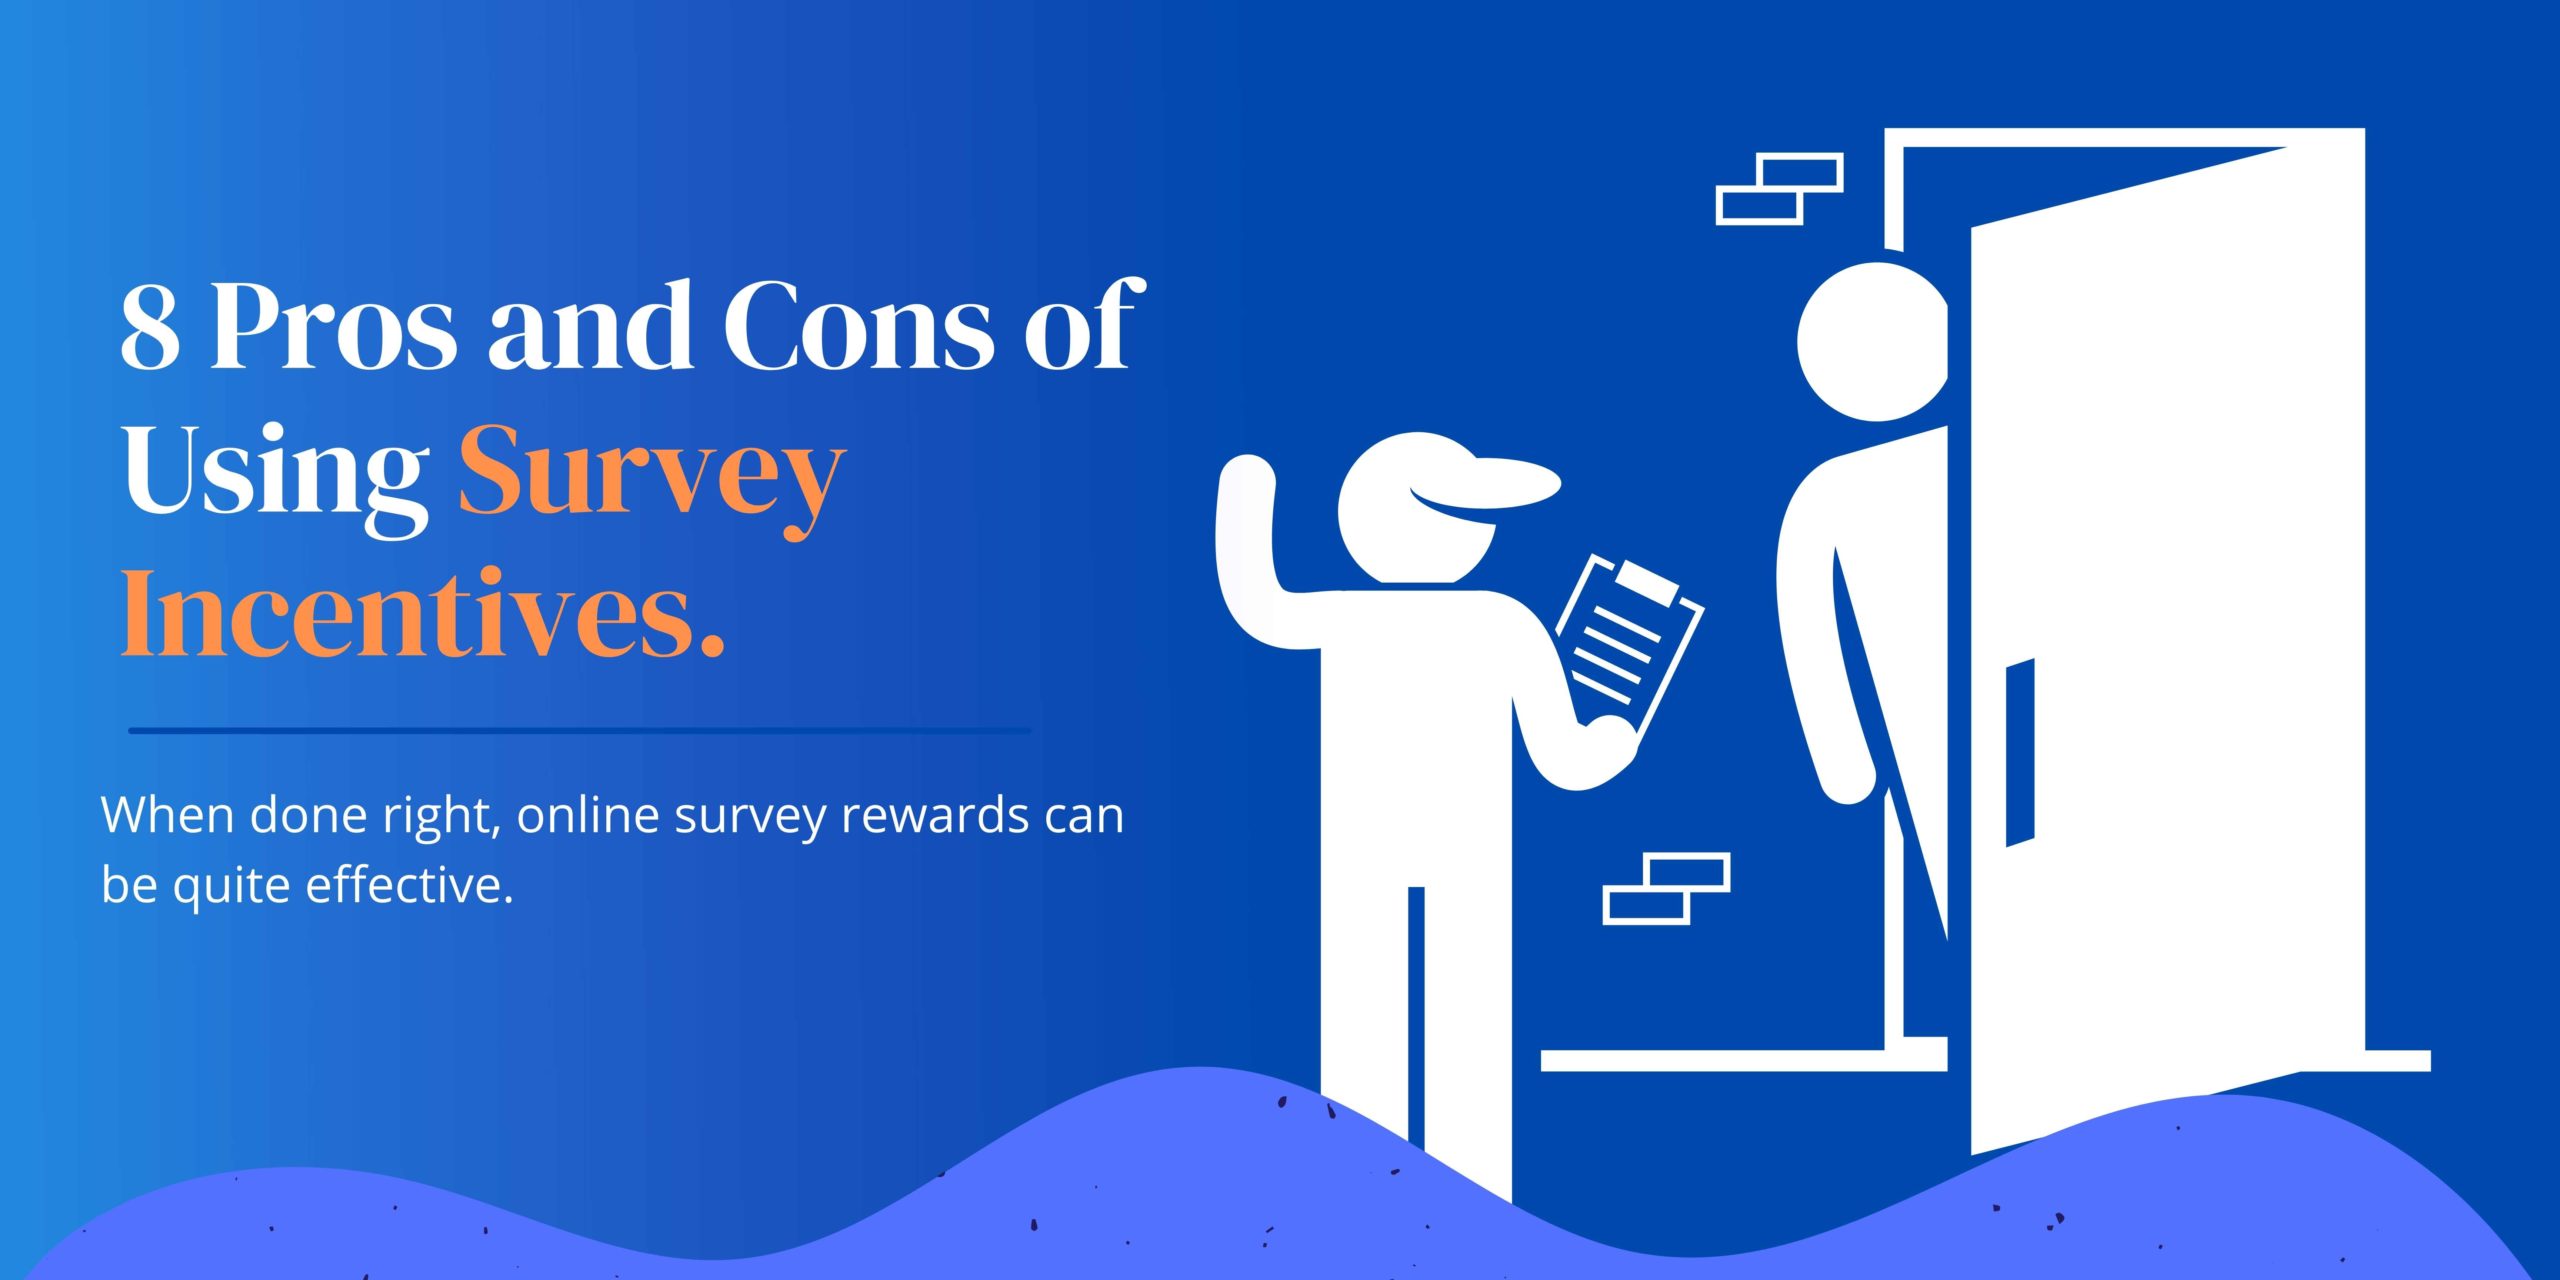 8 Pros and Cons of Using Survey Incentives